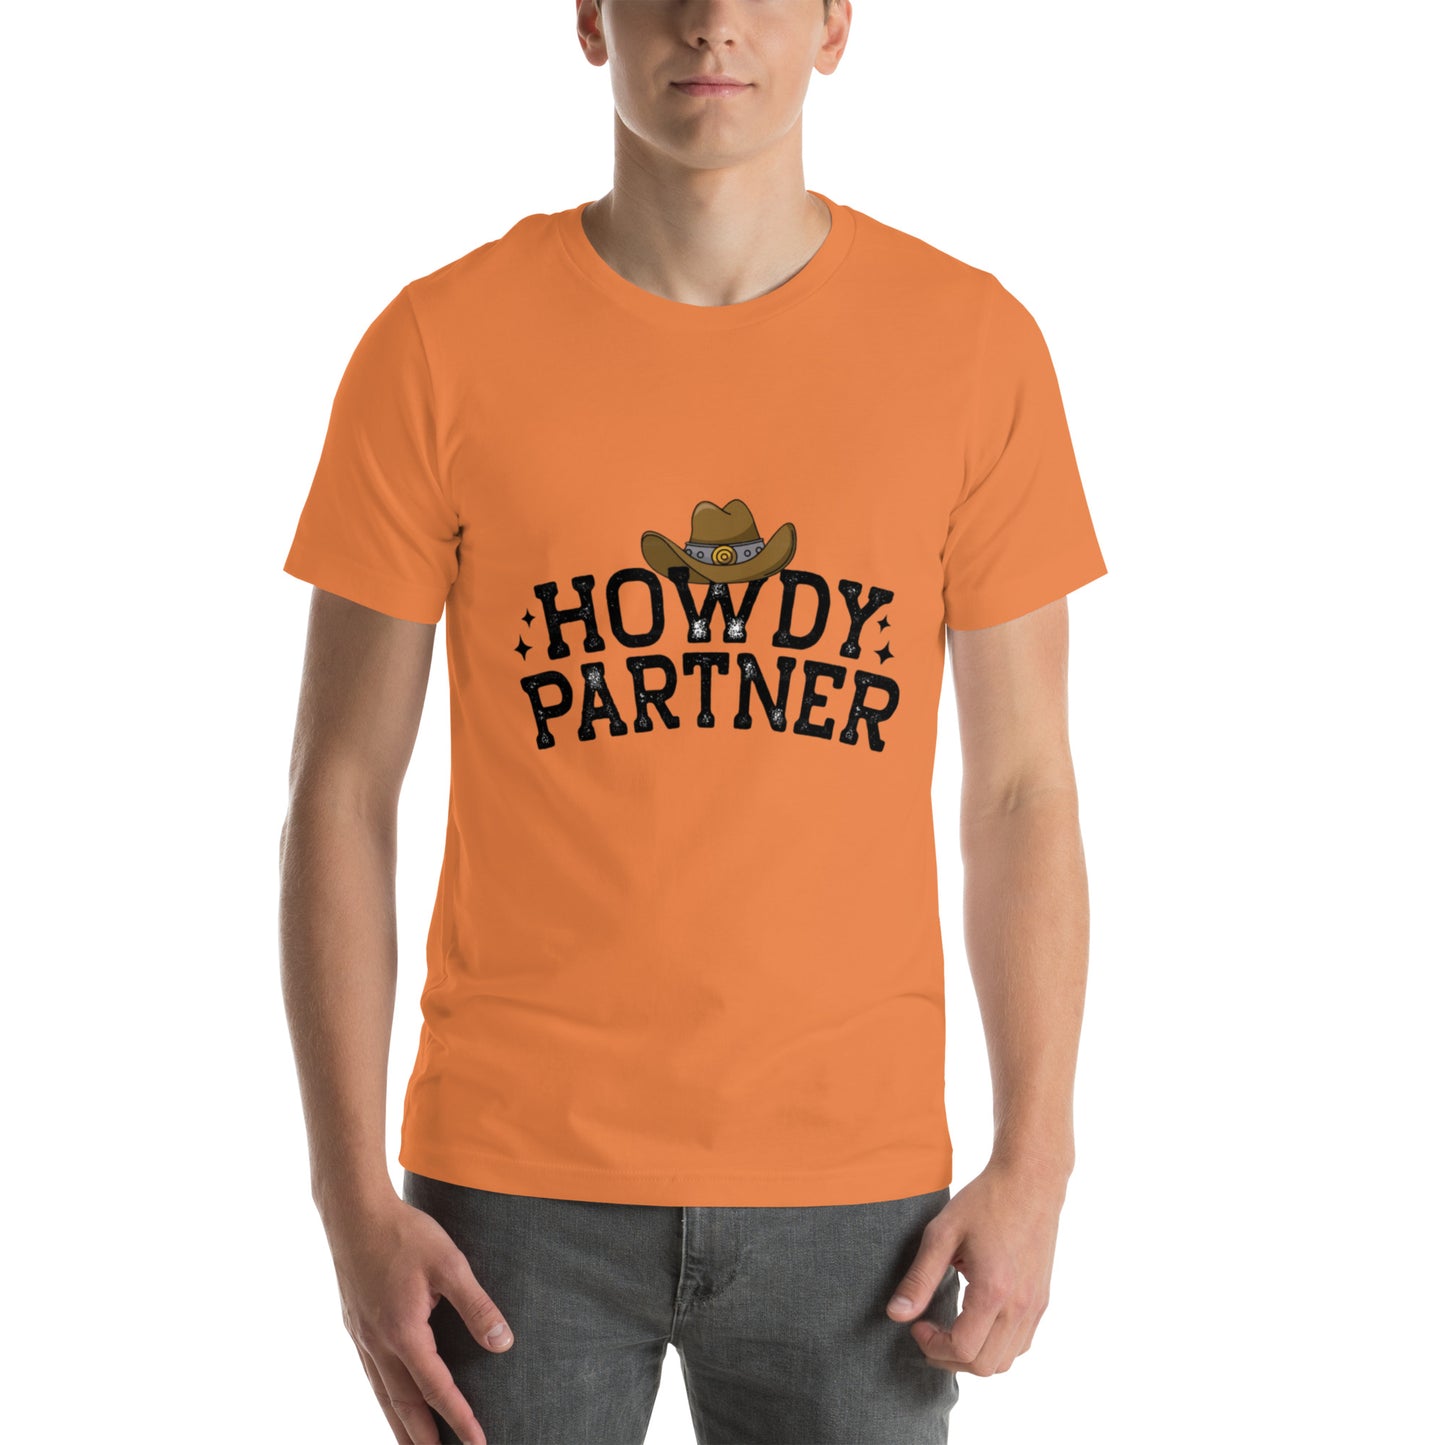 Howdy Partner - Classic Country Tees